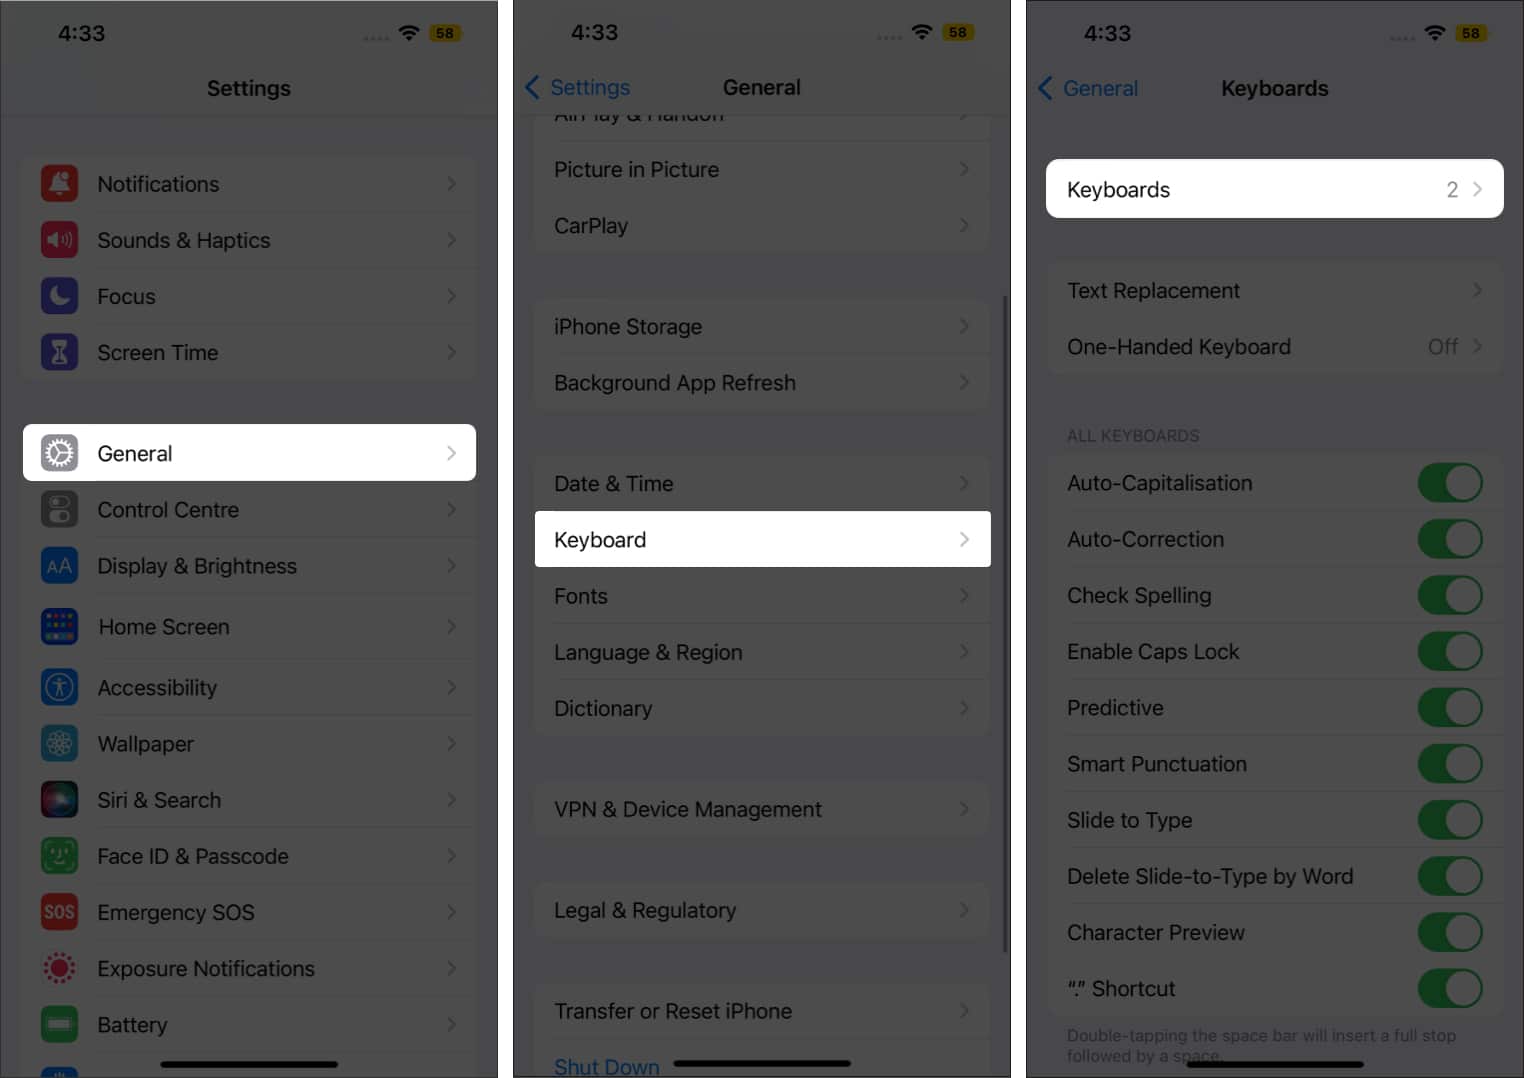 Go to Keyboards from iPhone's Settings